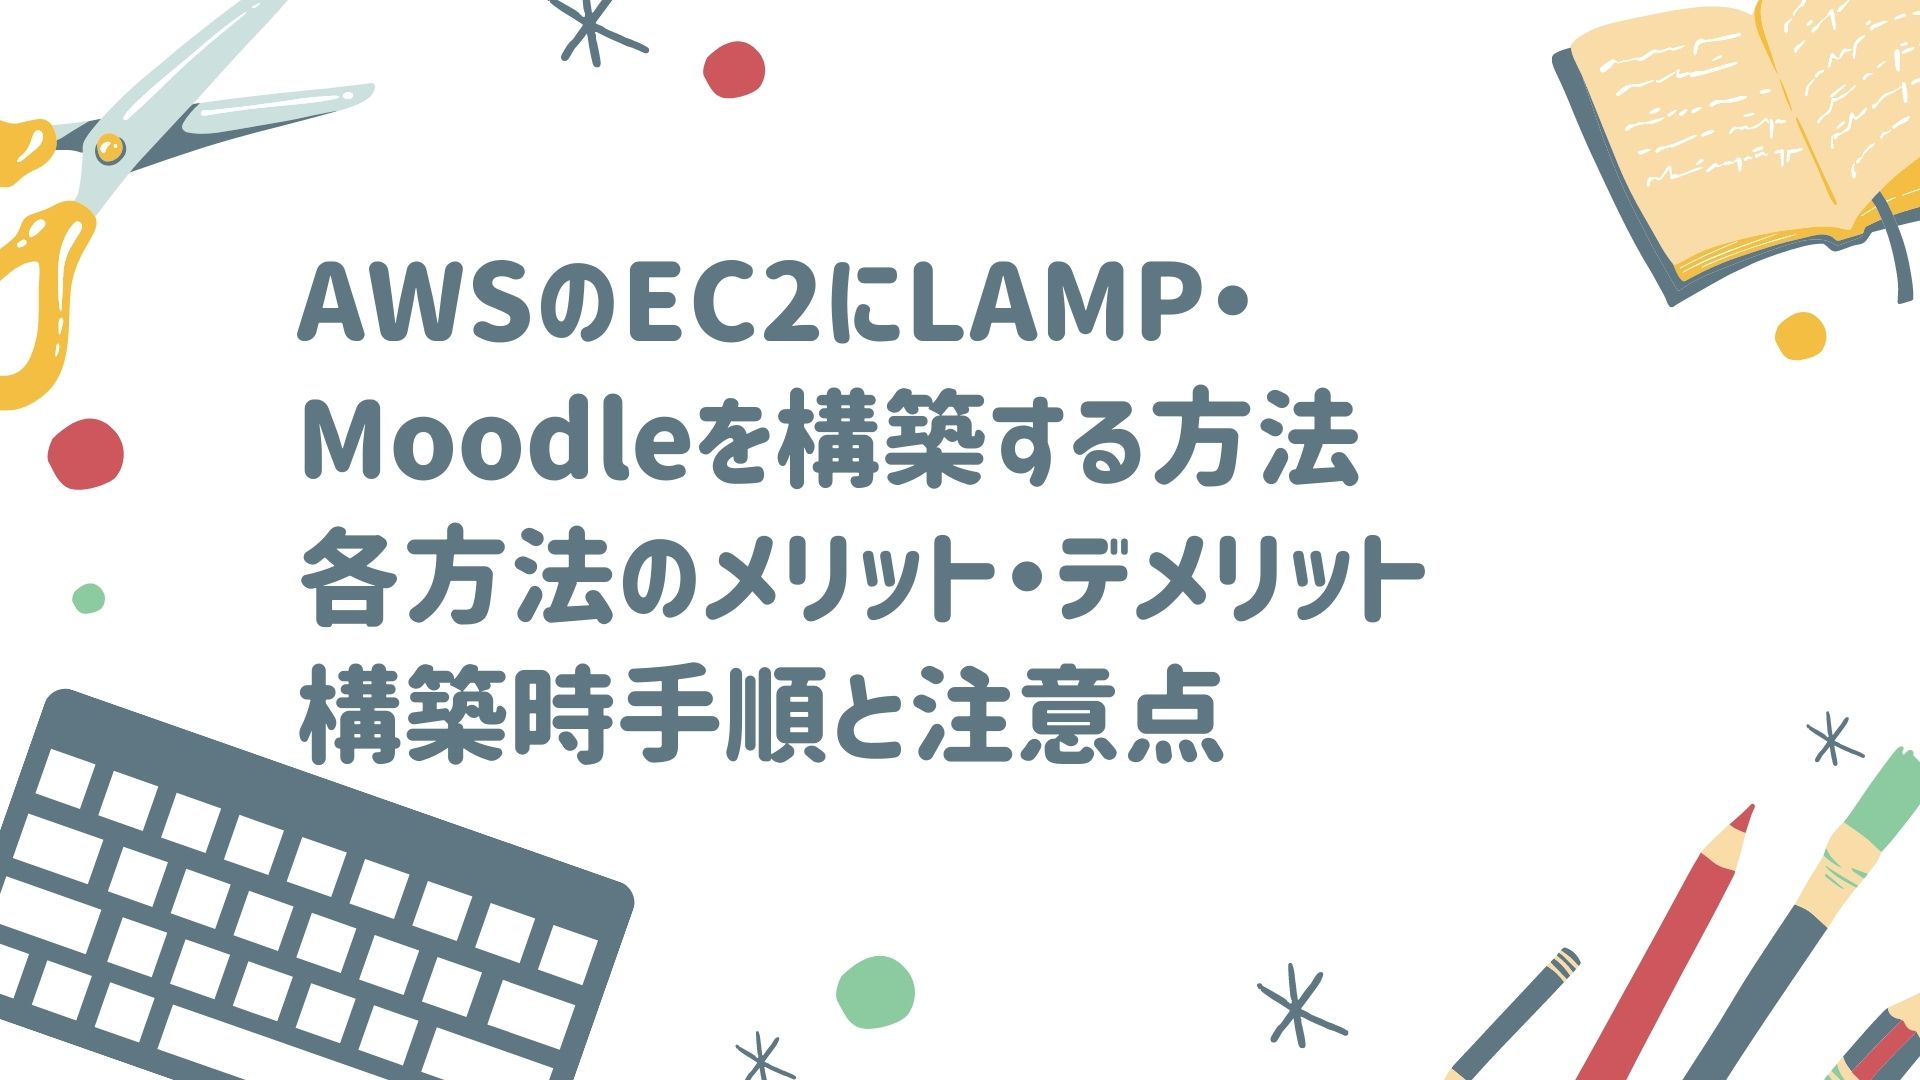 LAMPのMoodle構築メリットデメリット